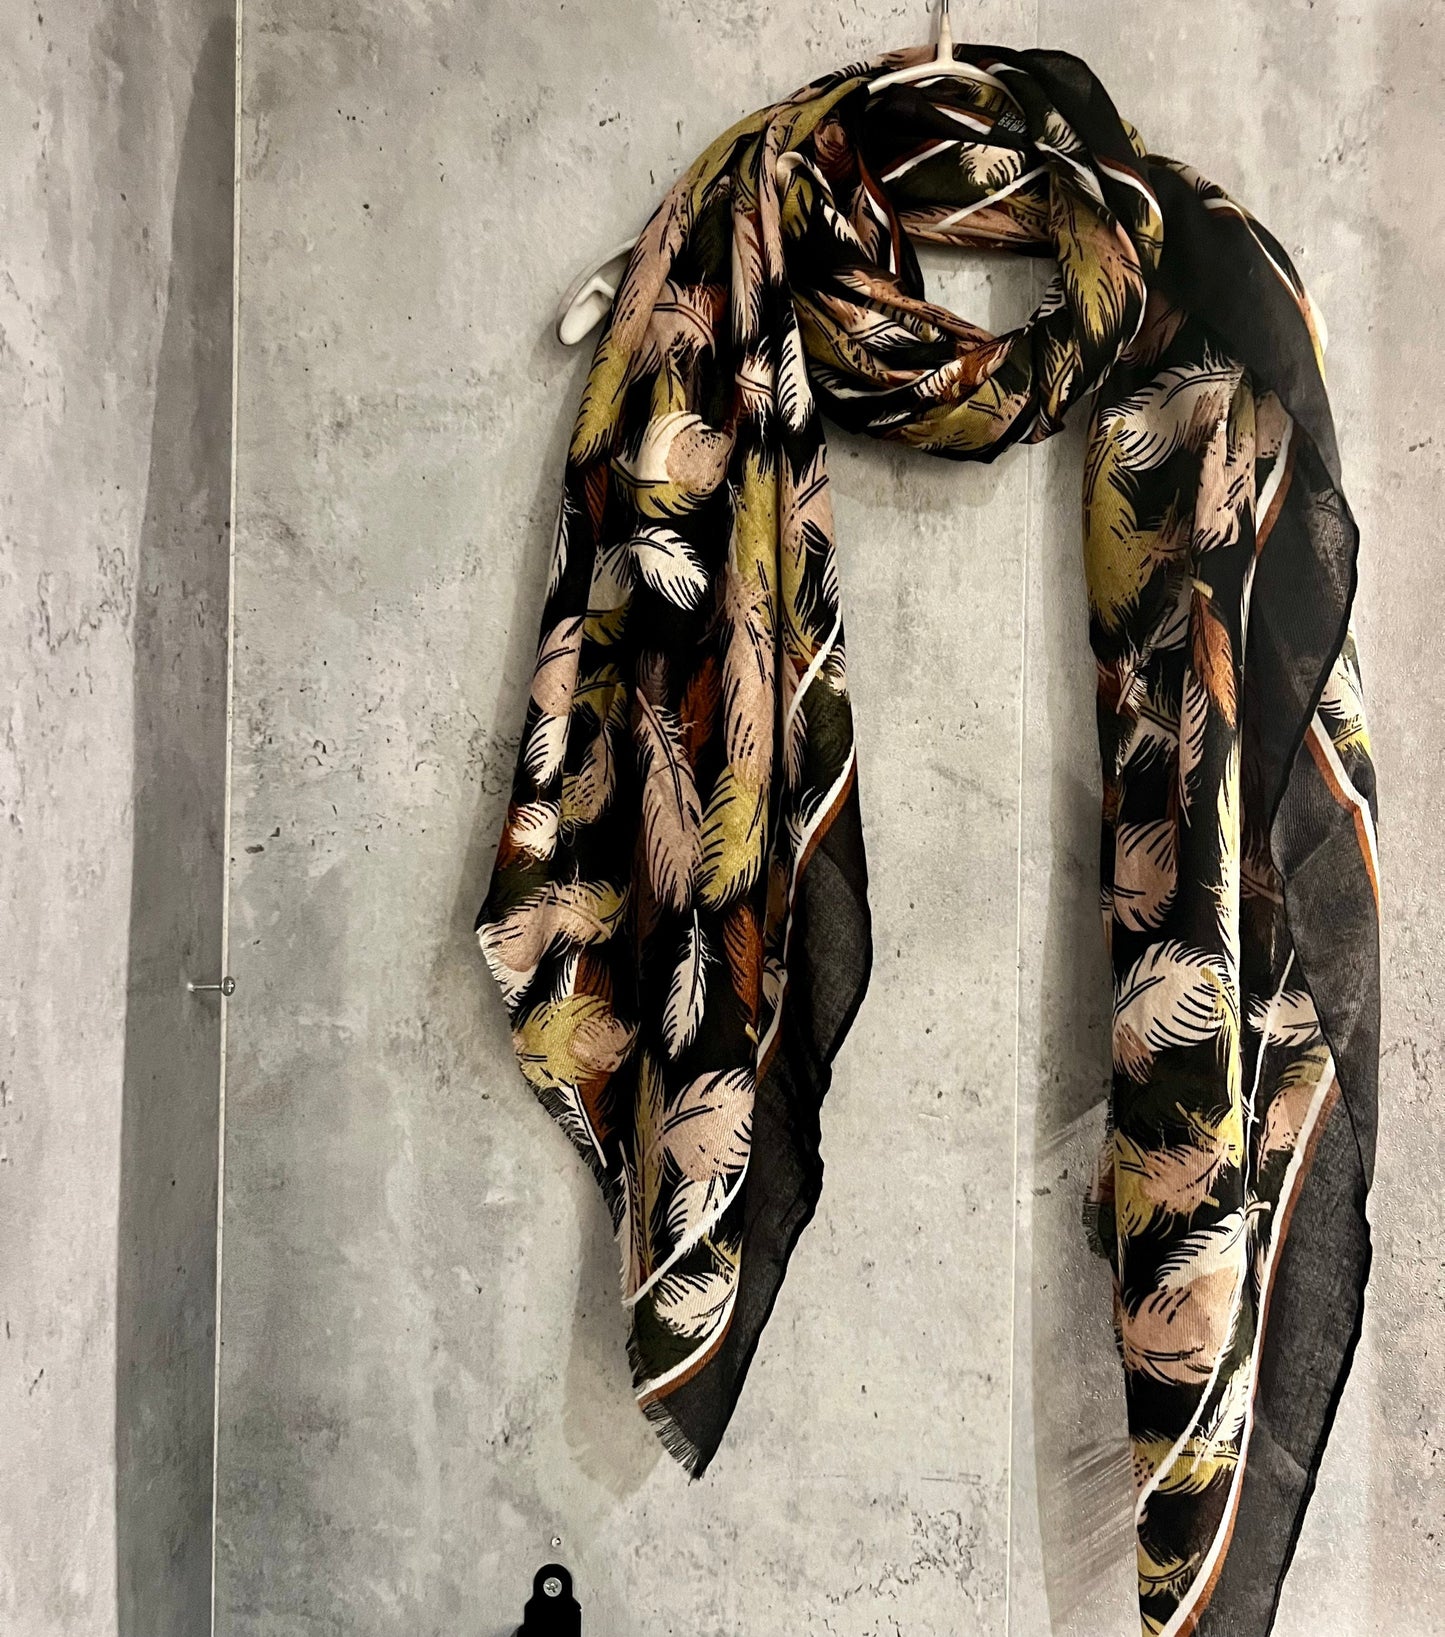 Black Cotton Scarf with Floating Green Beige Feathers – A Stylish and Versatile Gift for Her